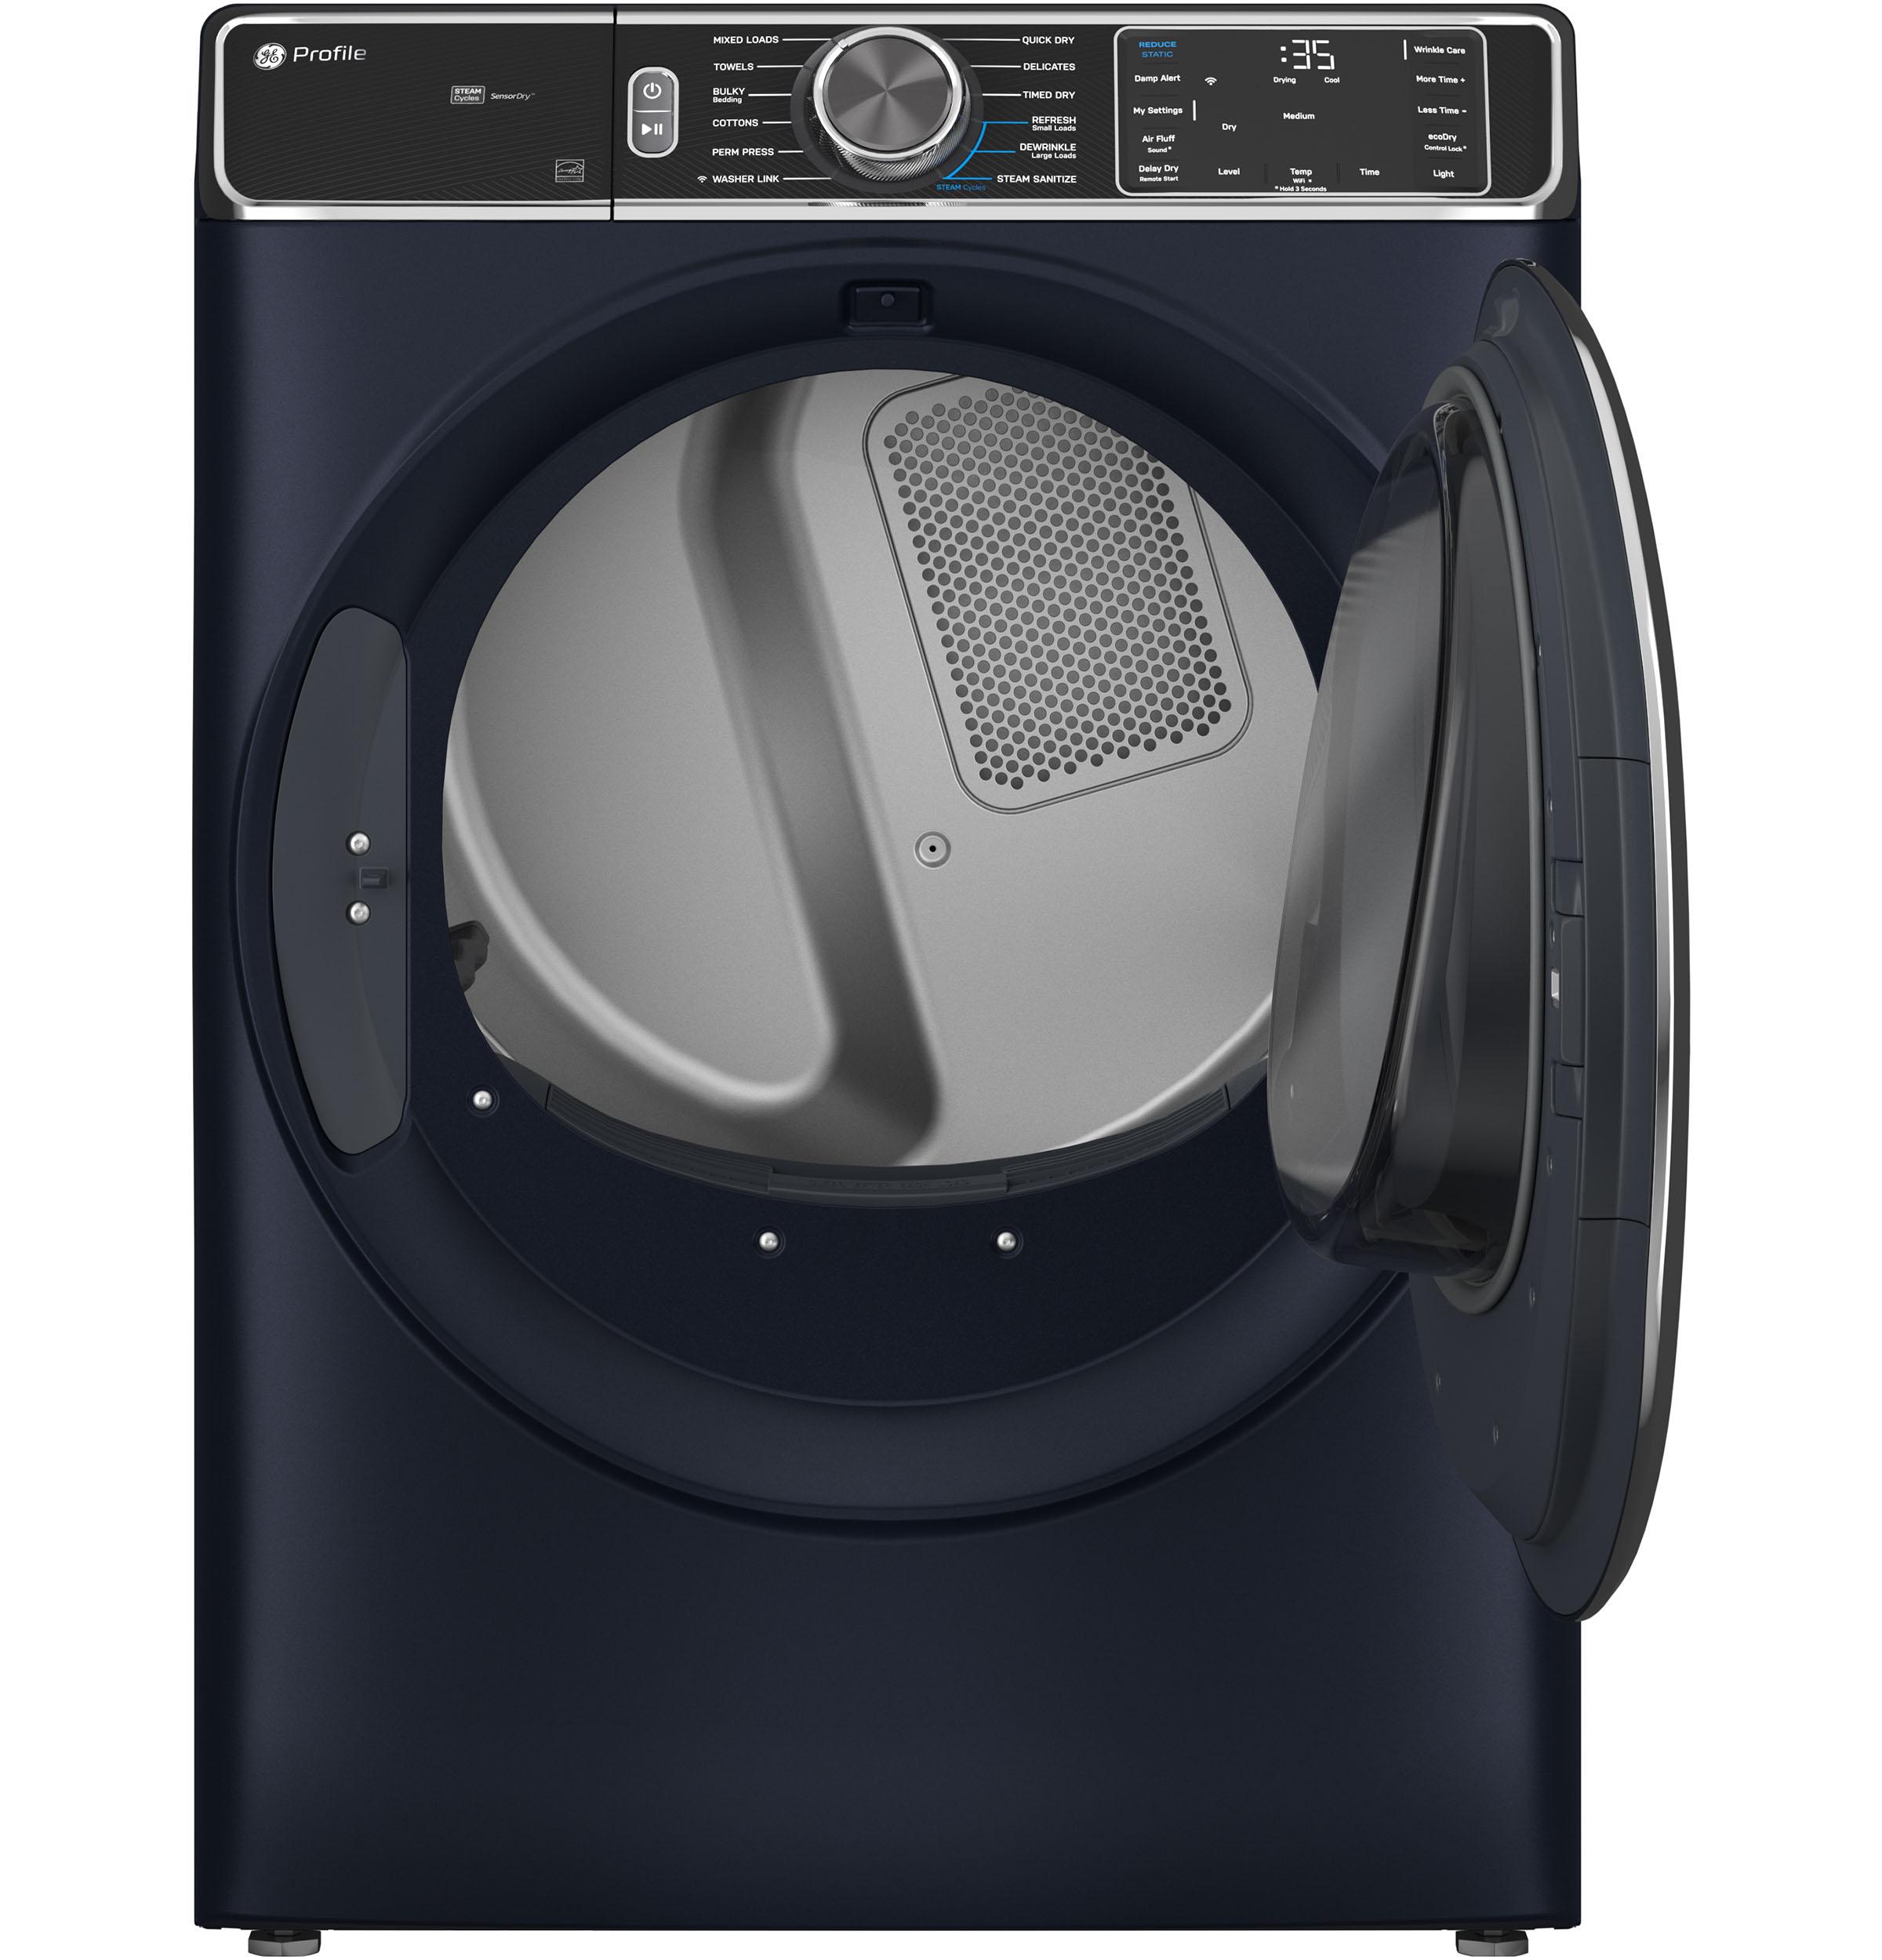 GE Profile™ 7.8 cu. ft. Capacity Smart Front Load Electric Dryer with Steam and Sanitize Cycle